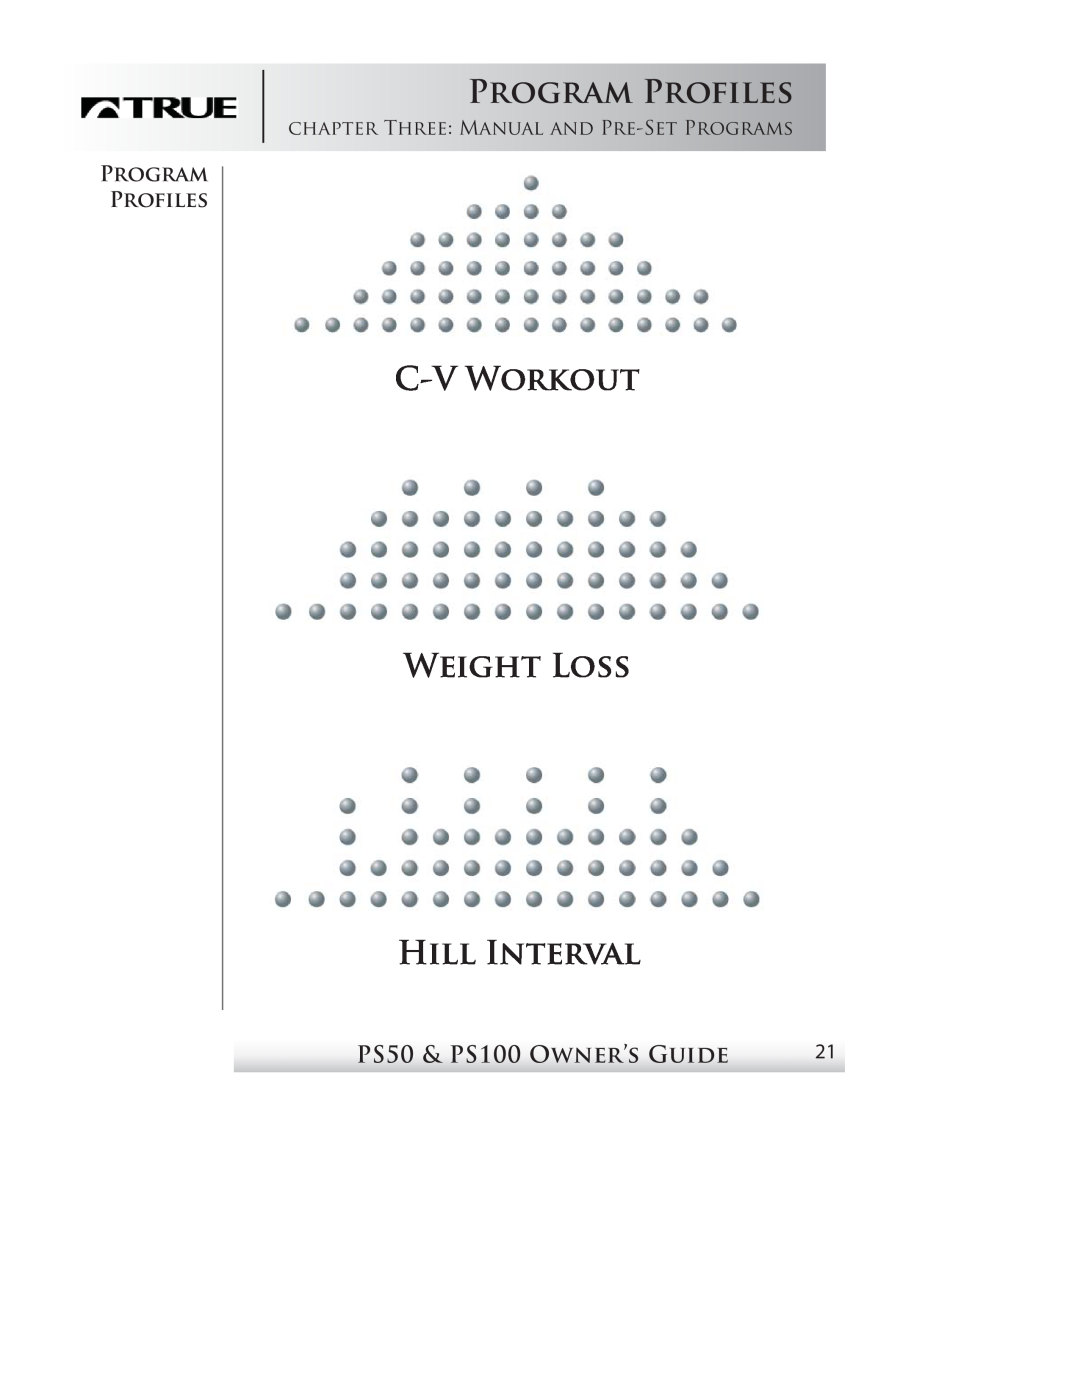 True Fitness P100 manual Program Profiles, C-V Workout Weight Loss Hill Interval, PS50 & PS100 Owner’s Guide 